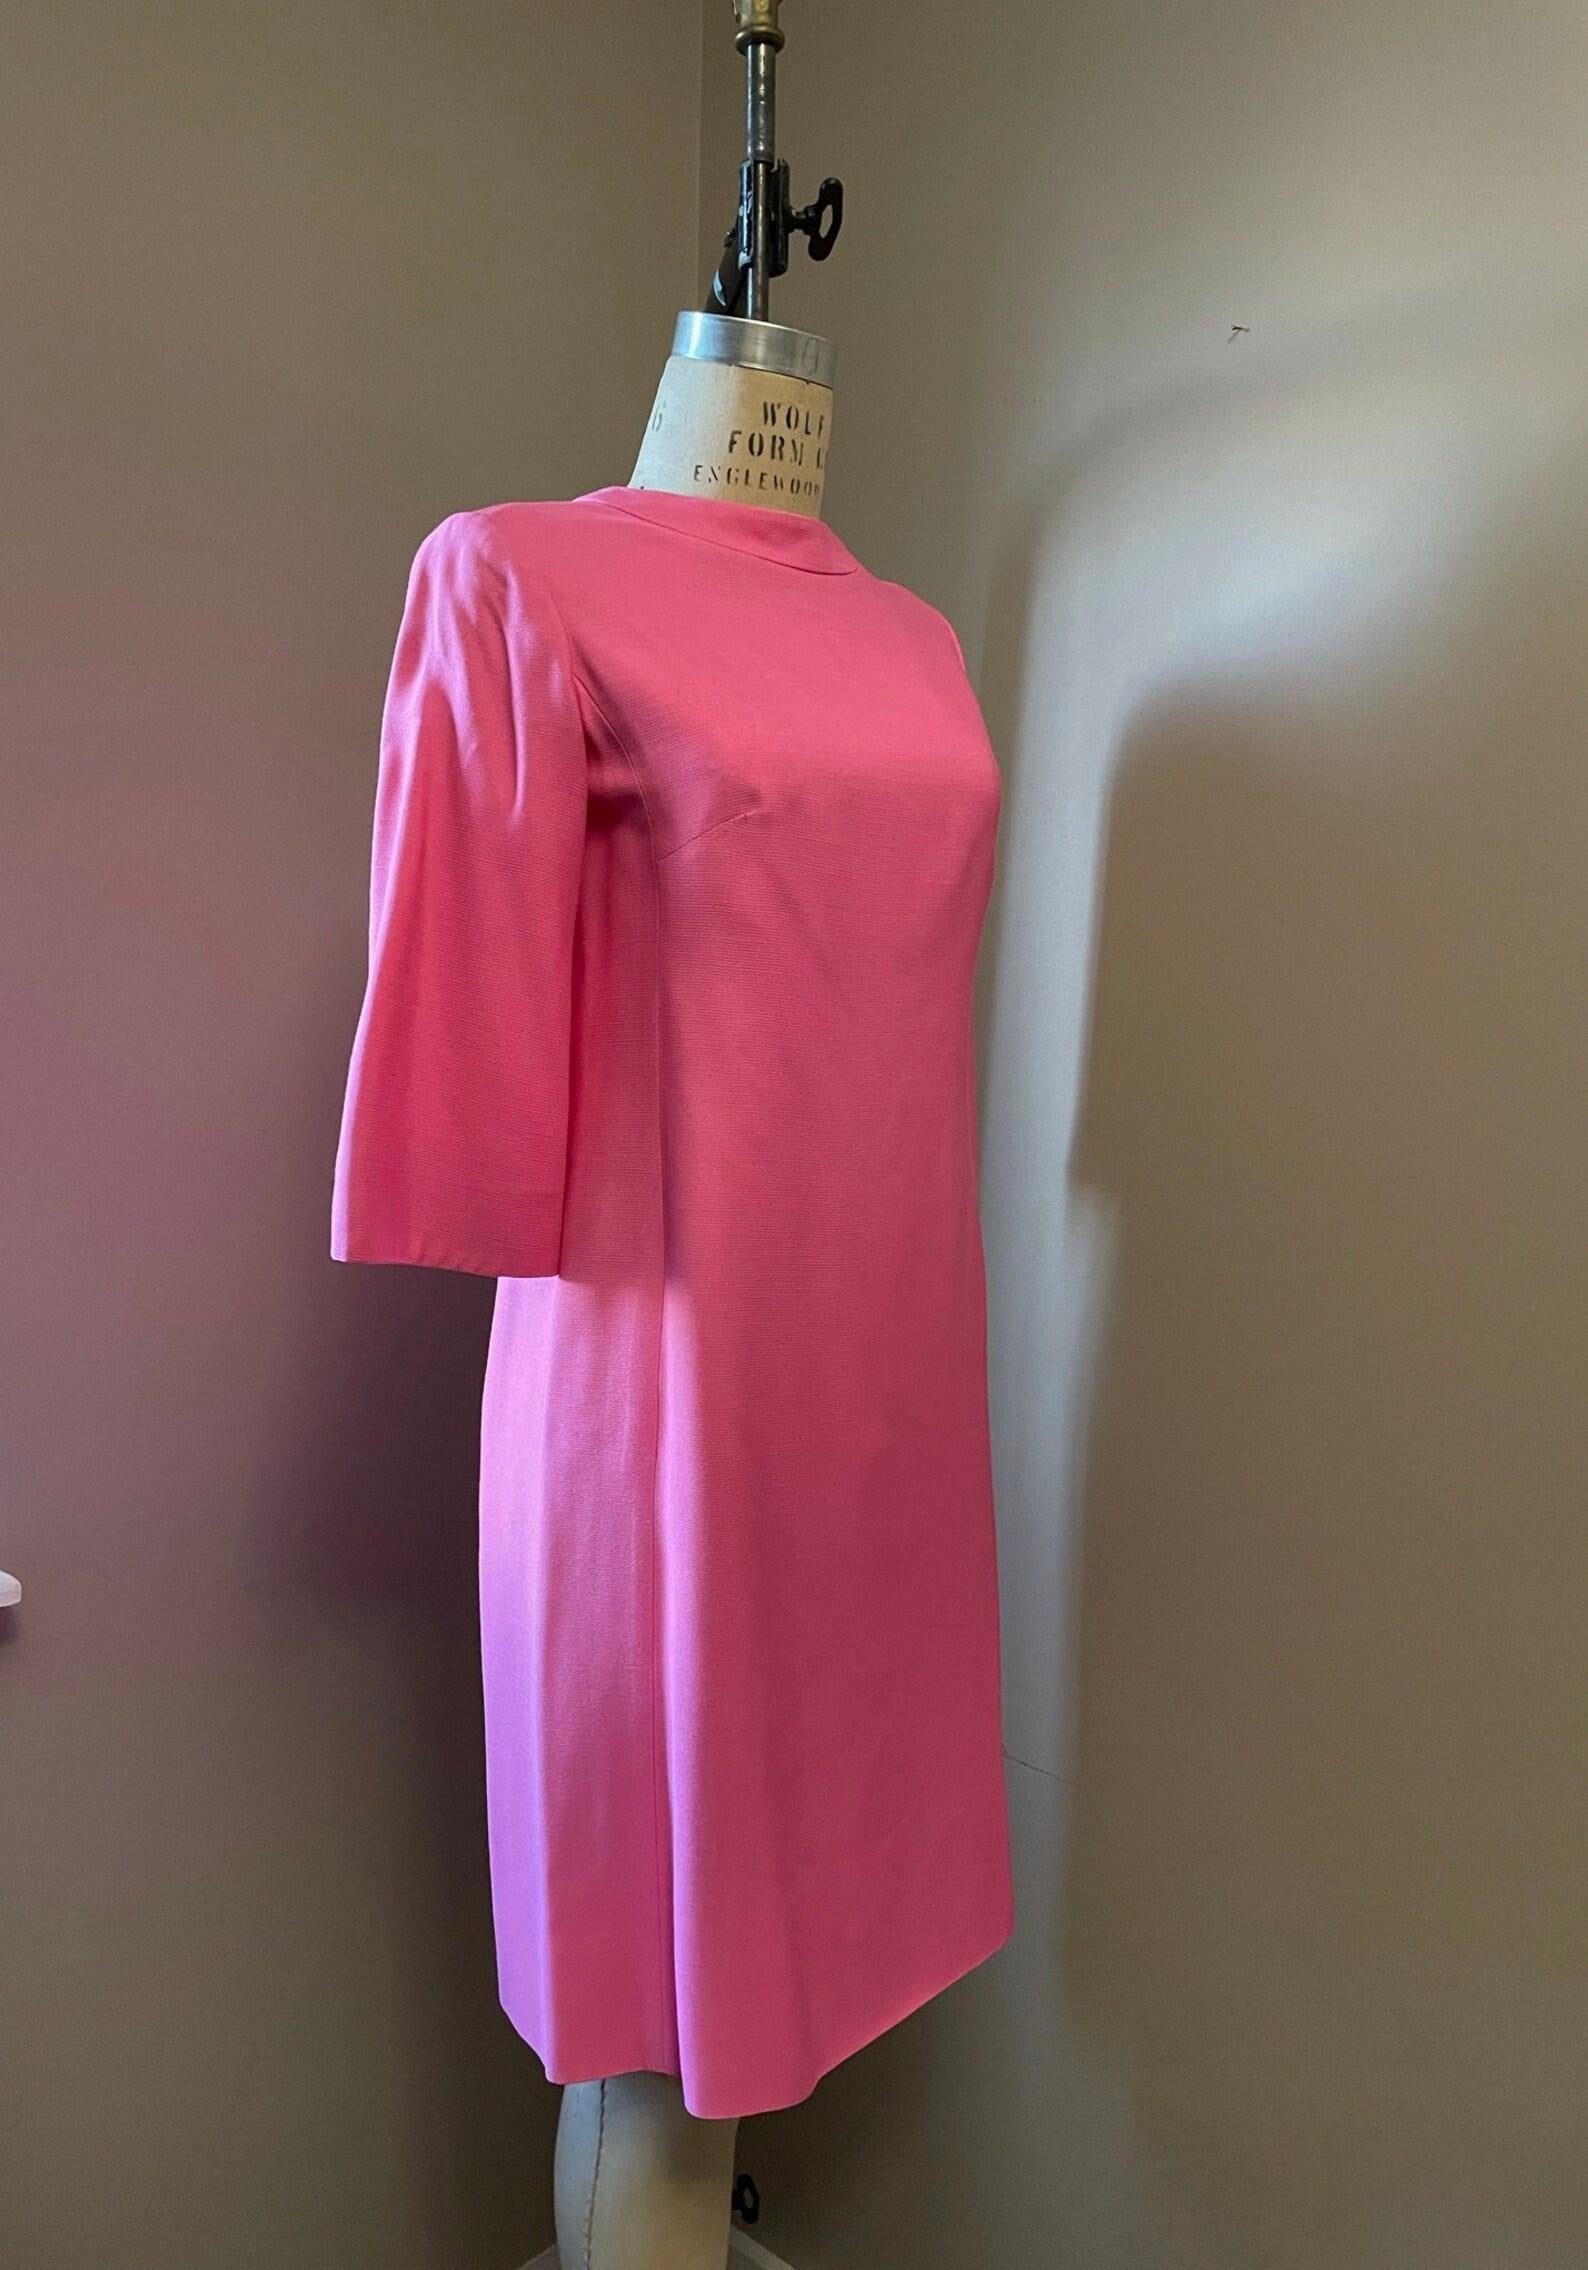 Suzy Perette Pink Shift Dress, Circa 1960s In Excellent Condition For Sale In Brooklyn, NY